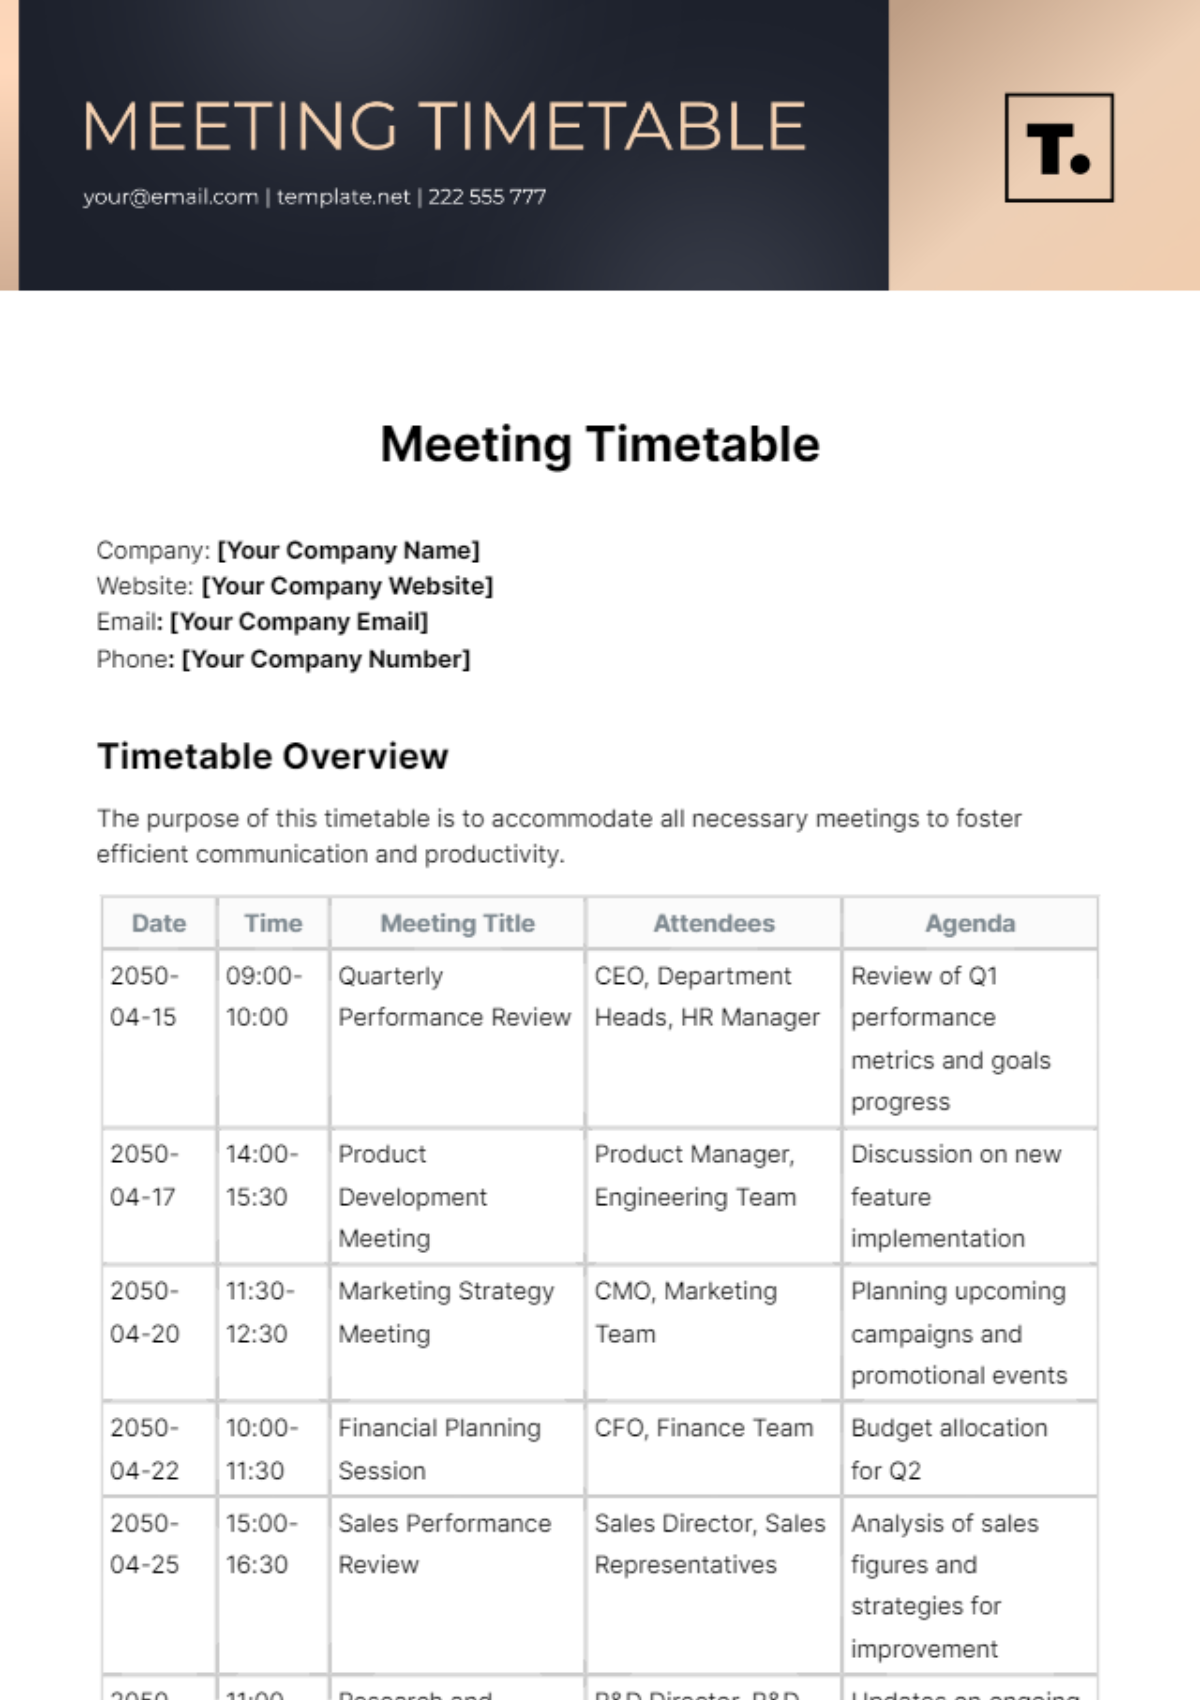 Free Meeting Timetable Template